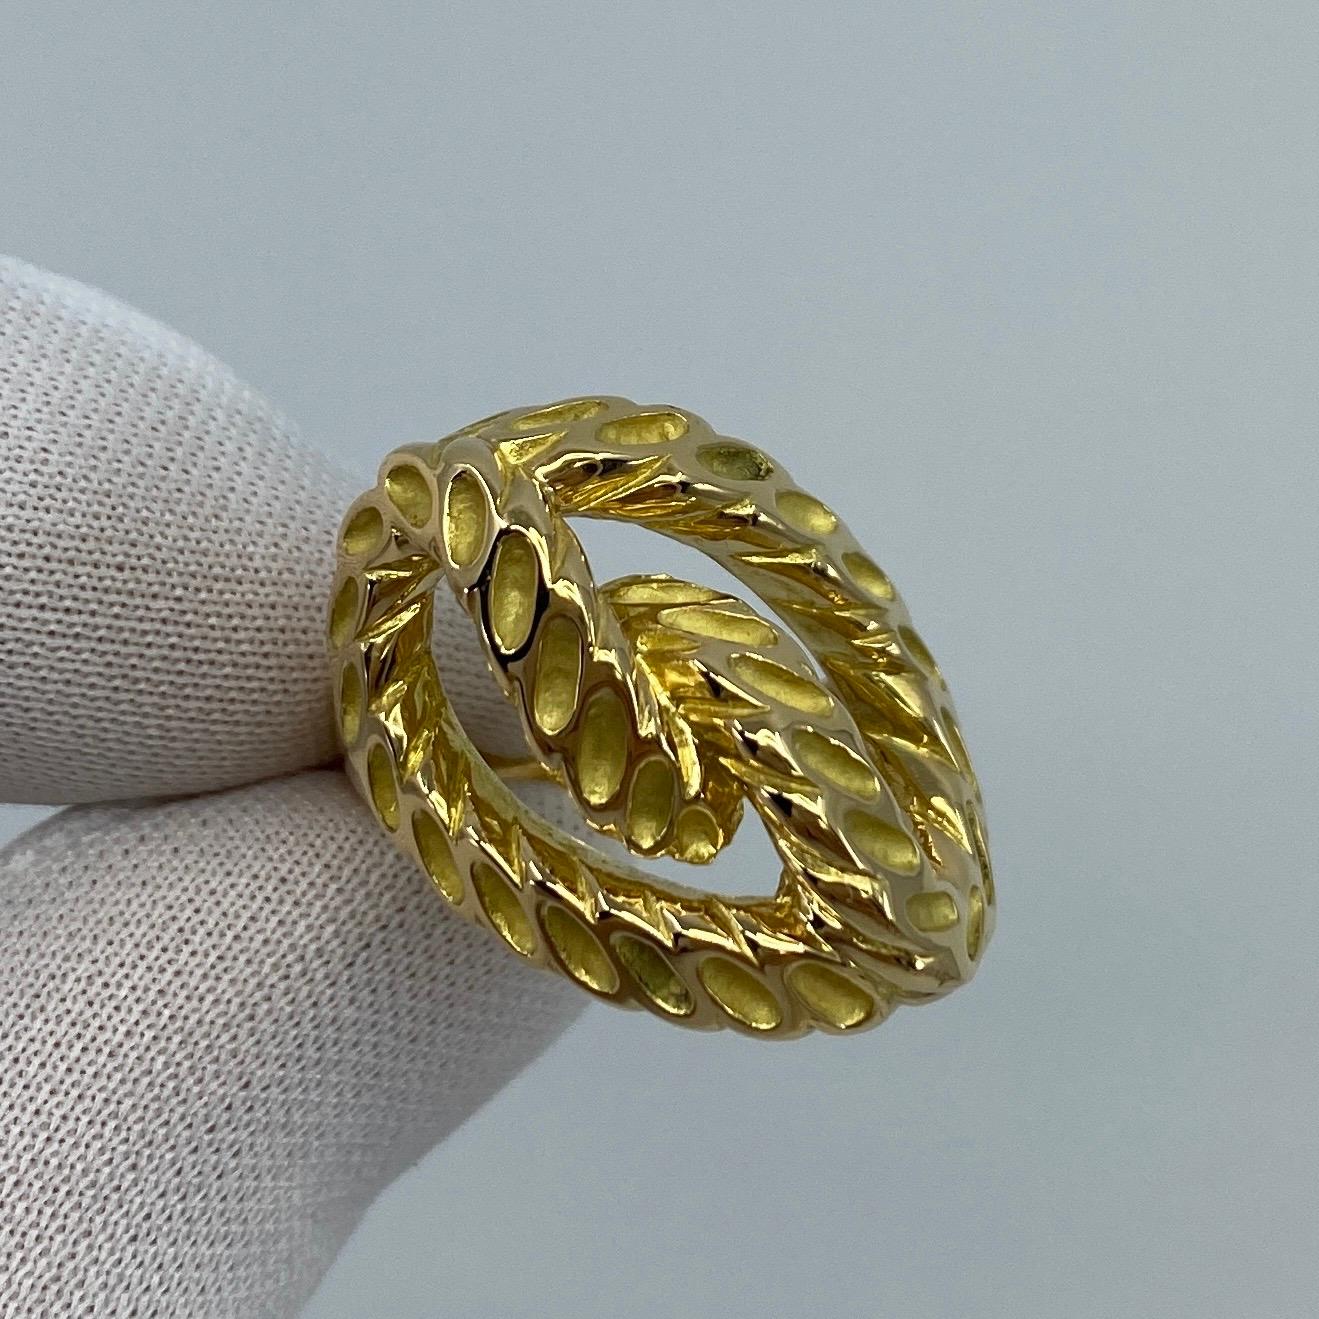 Rare Vintage Van Cleef & Arpels 18k Yellow Gold Braid Rope Motif Ring with Box For Sale 1